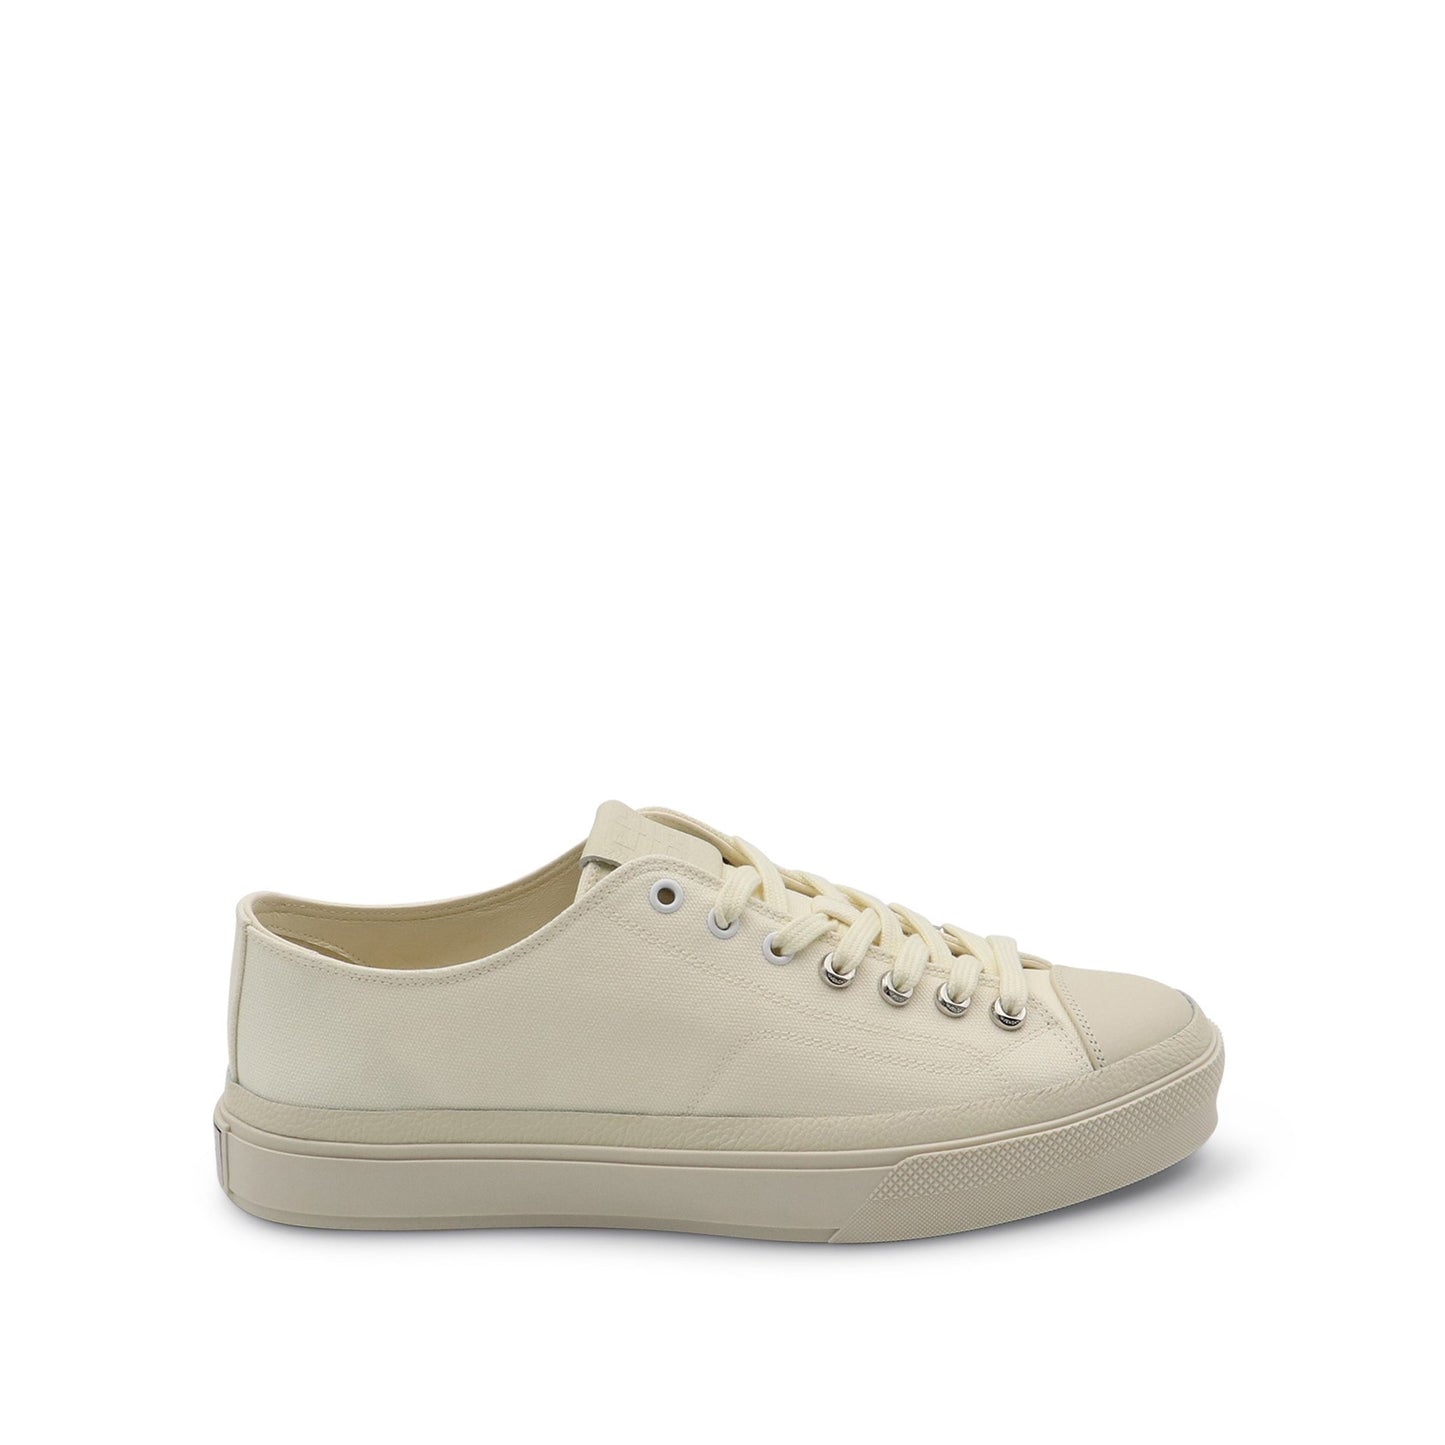 City Low Sneaker in Off White